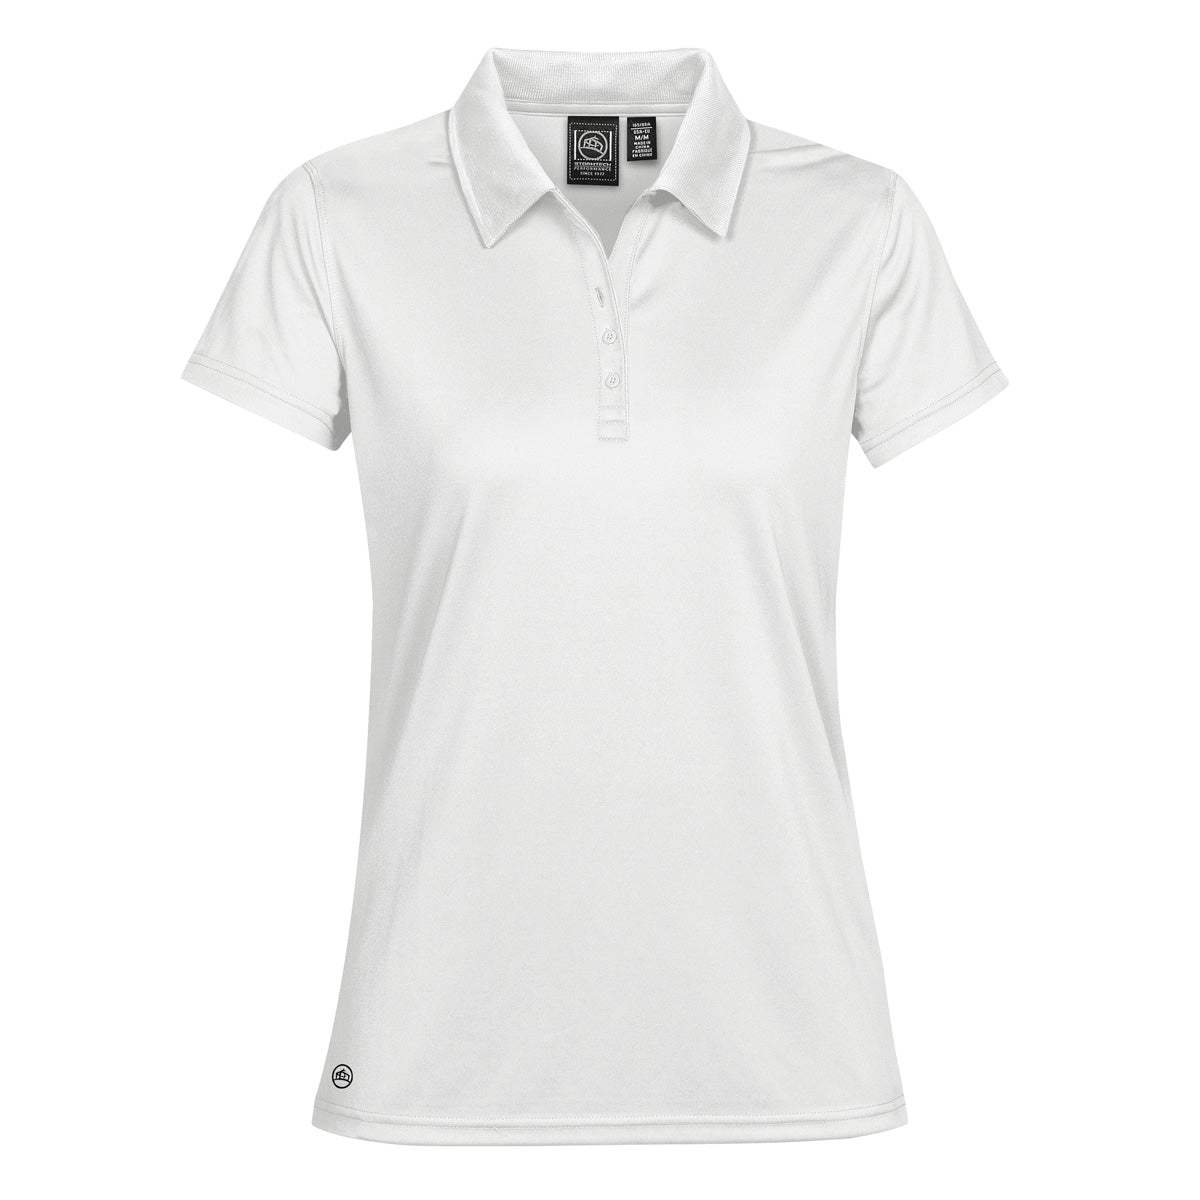 Women’s Eclipse H2X-DRY Pique Polo by Stormtech - Promotions Only Group Limited